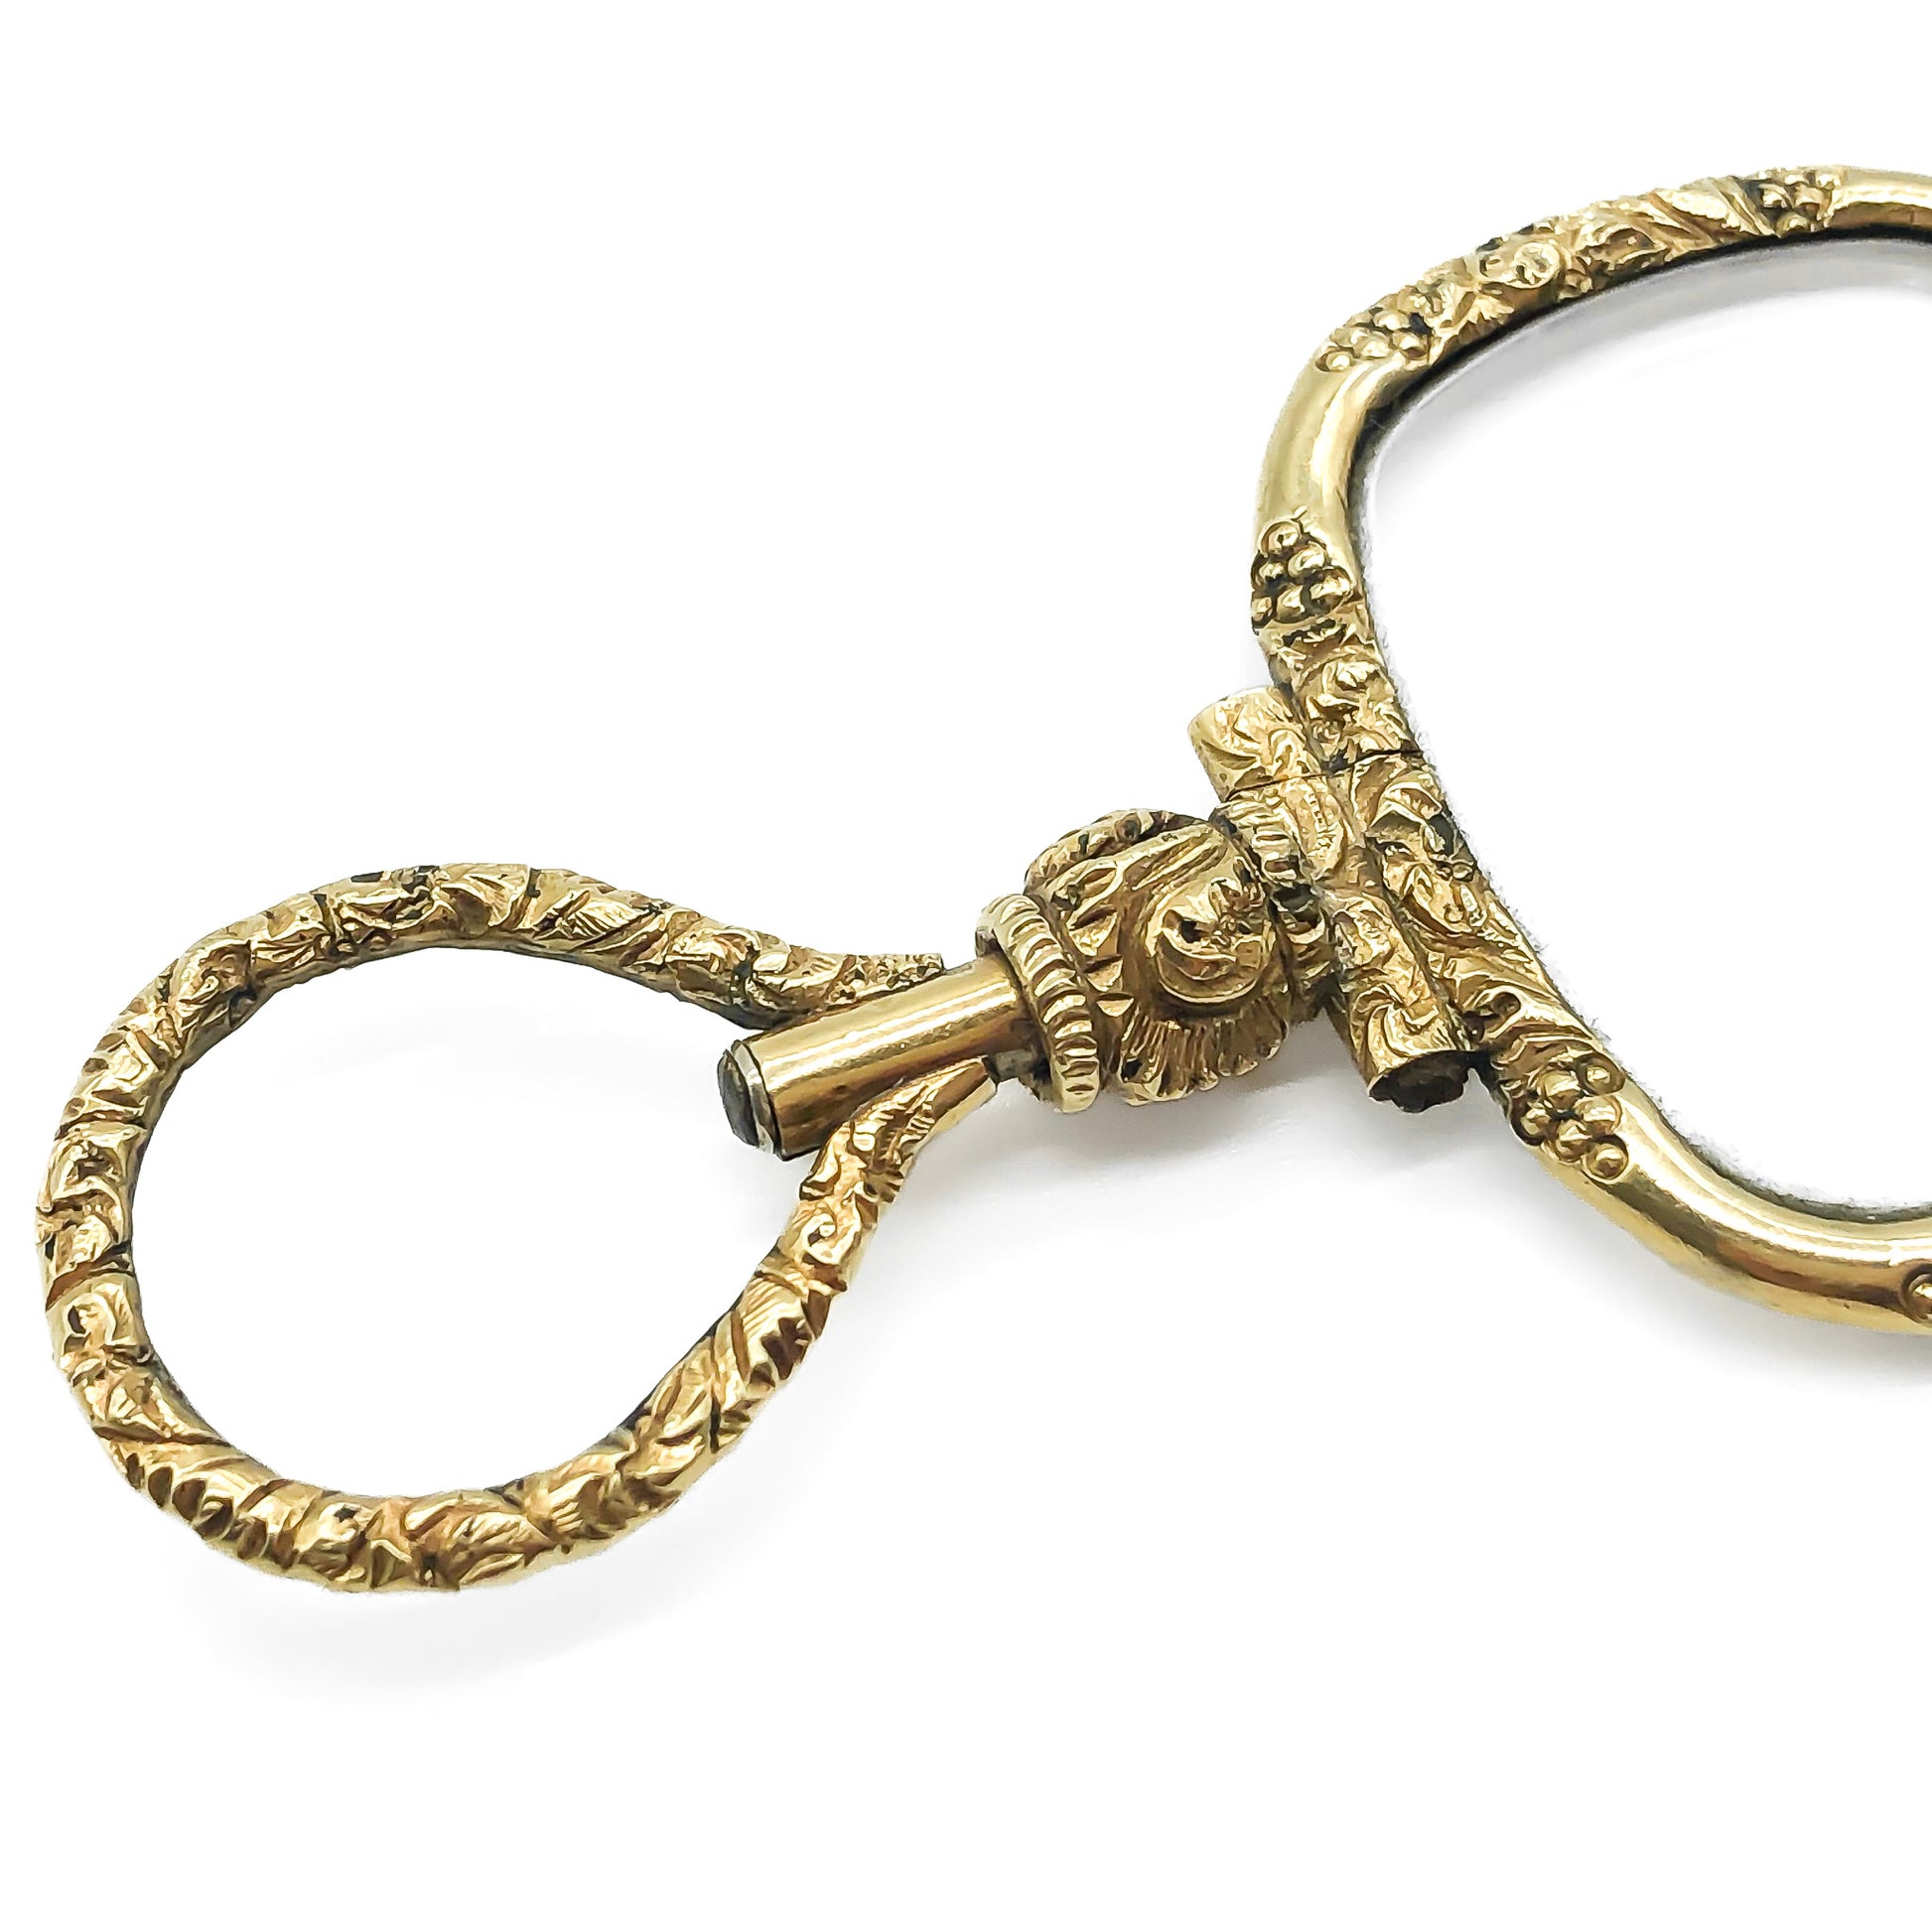 Ornate gold cased Victorian lorgnette with beautiful floral engraving.